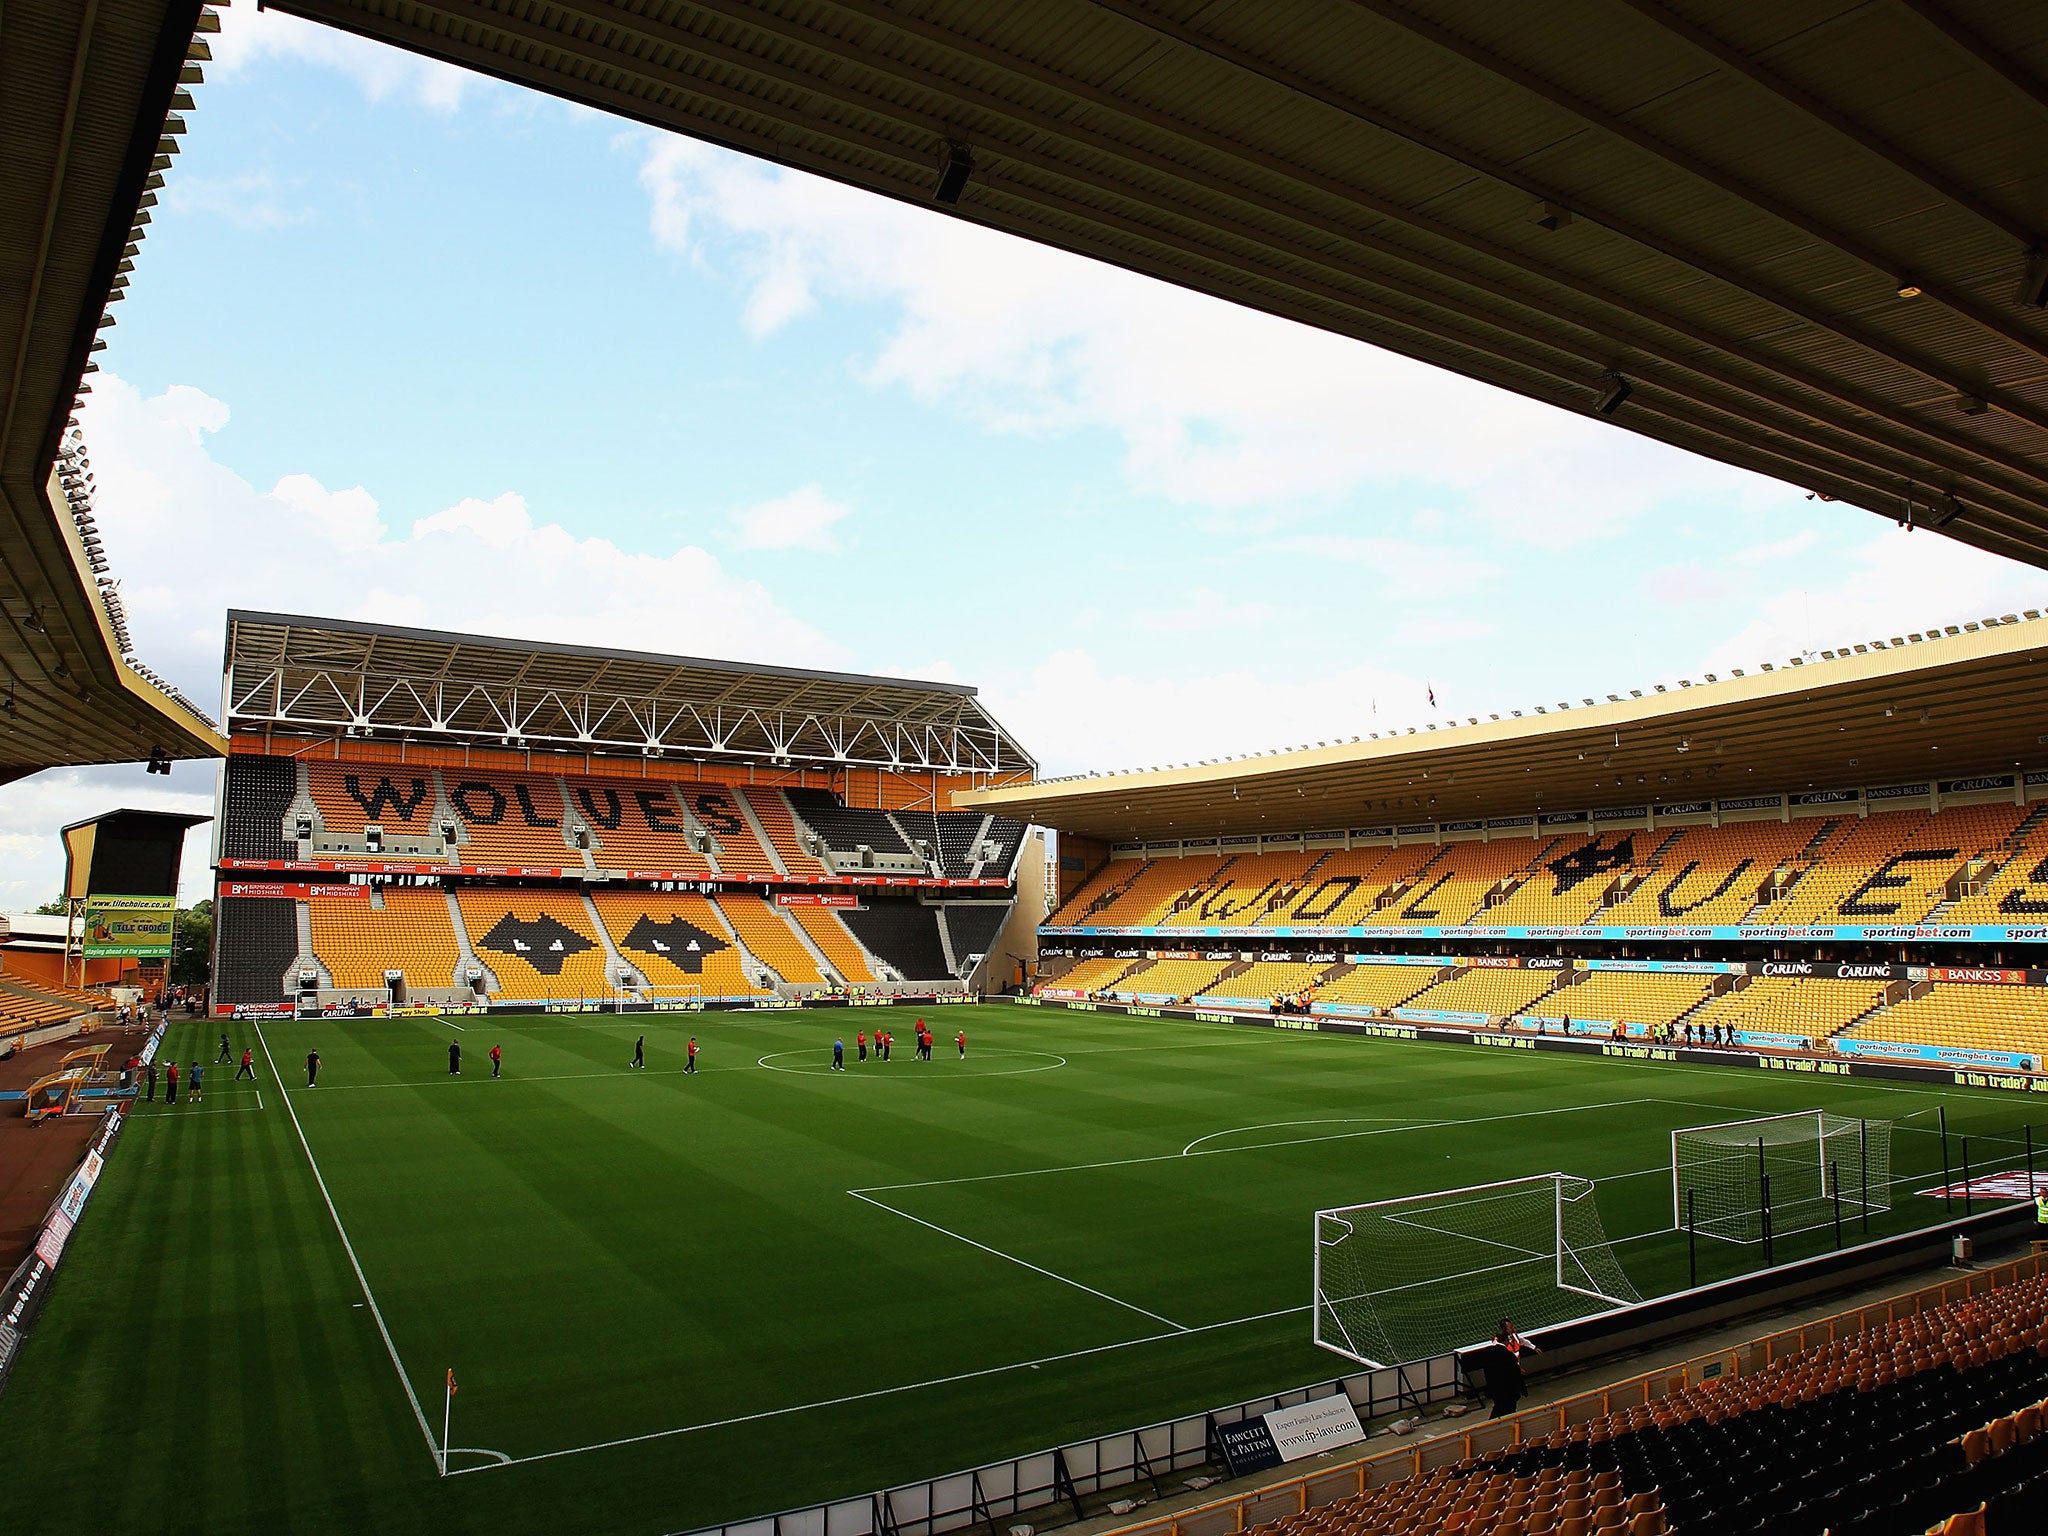 A view of Wolves' Molineux Stadium